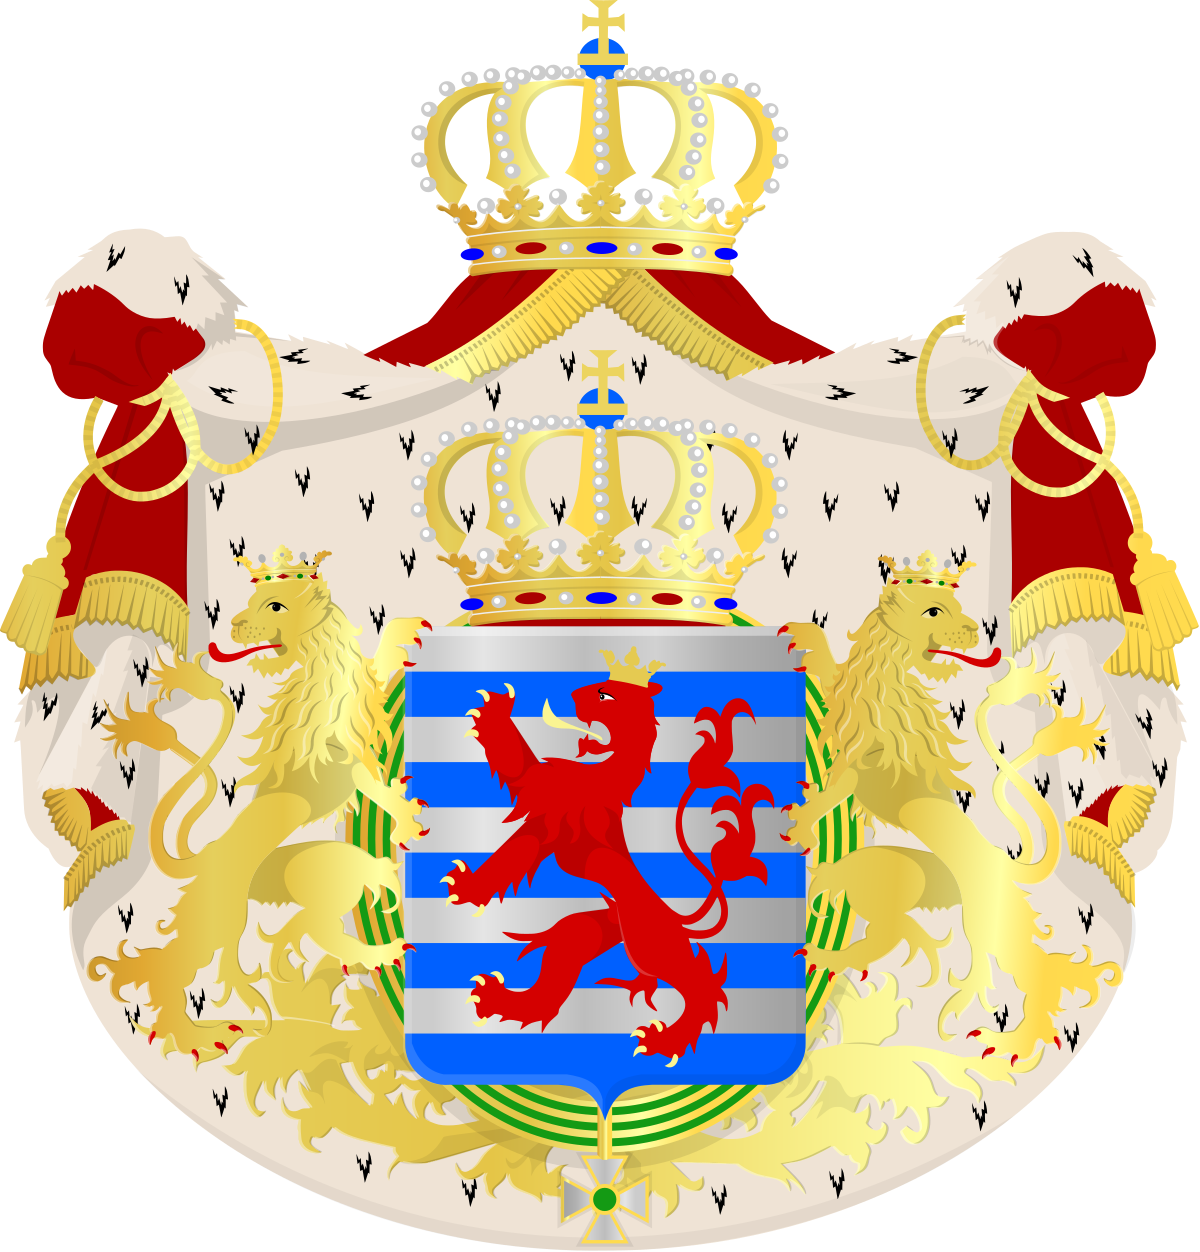 A Coat Of Arms With Lions And A Crown